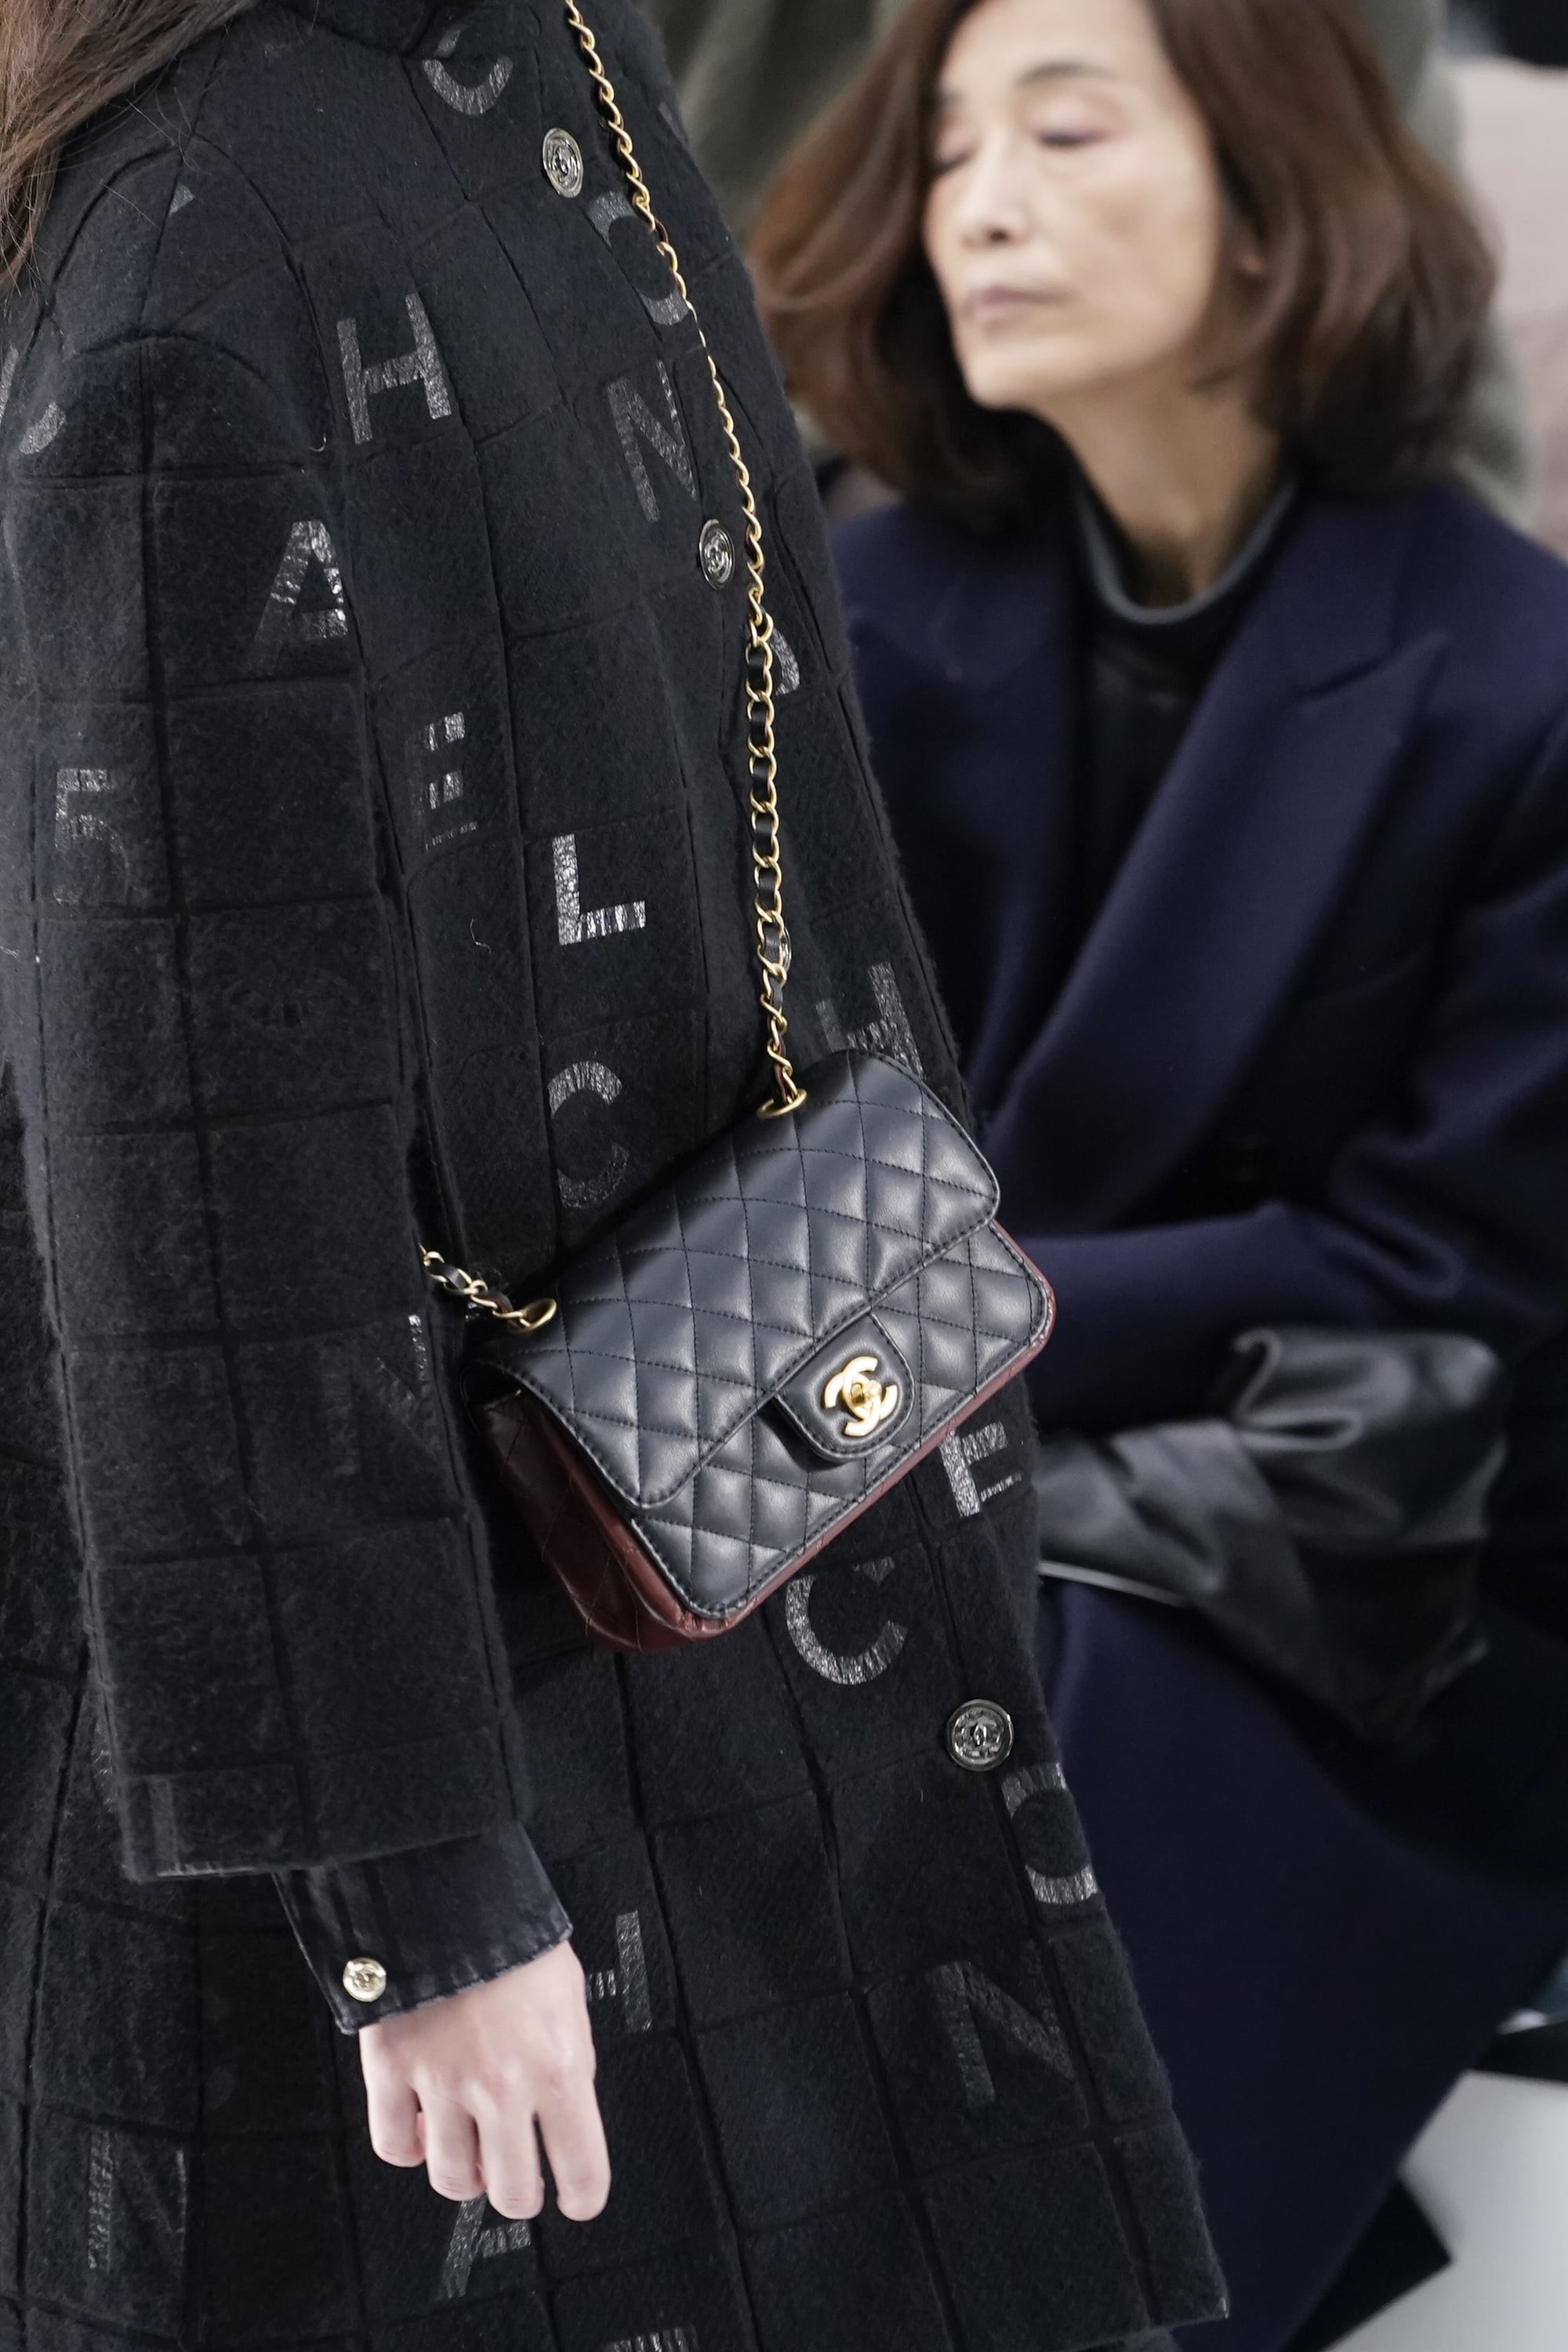 Chanel Fall/Winter 2020 Small Leather Goods Collection - Spotted Fashion